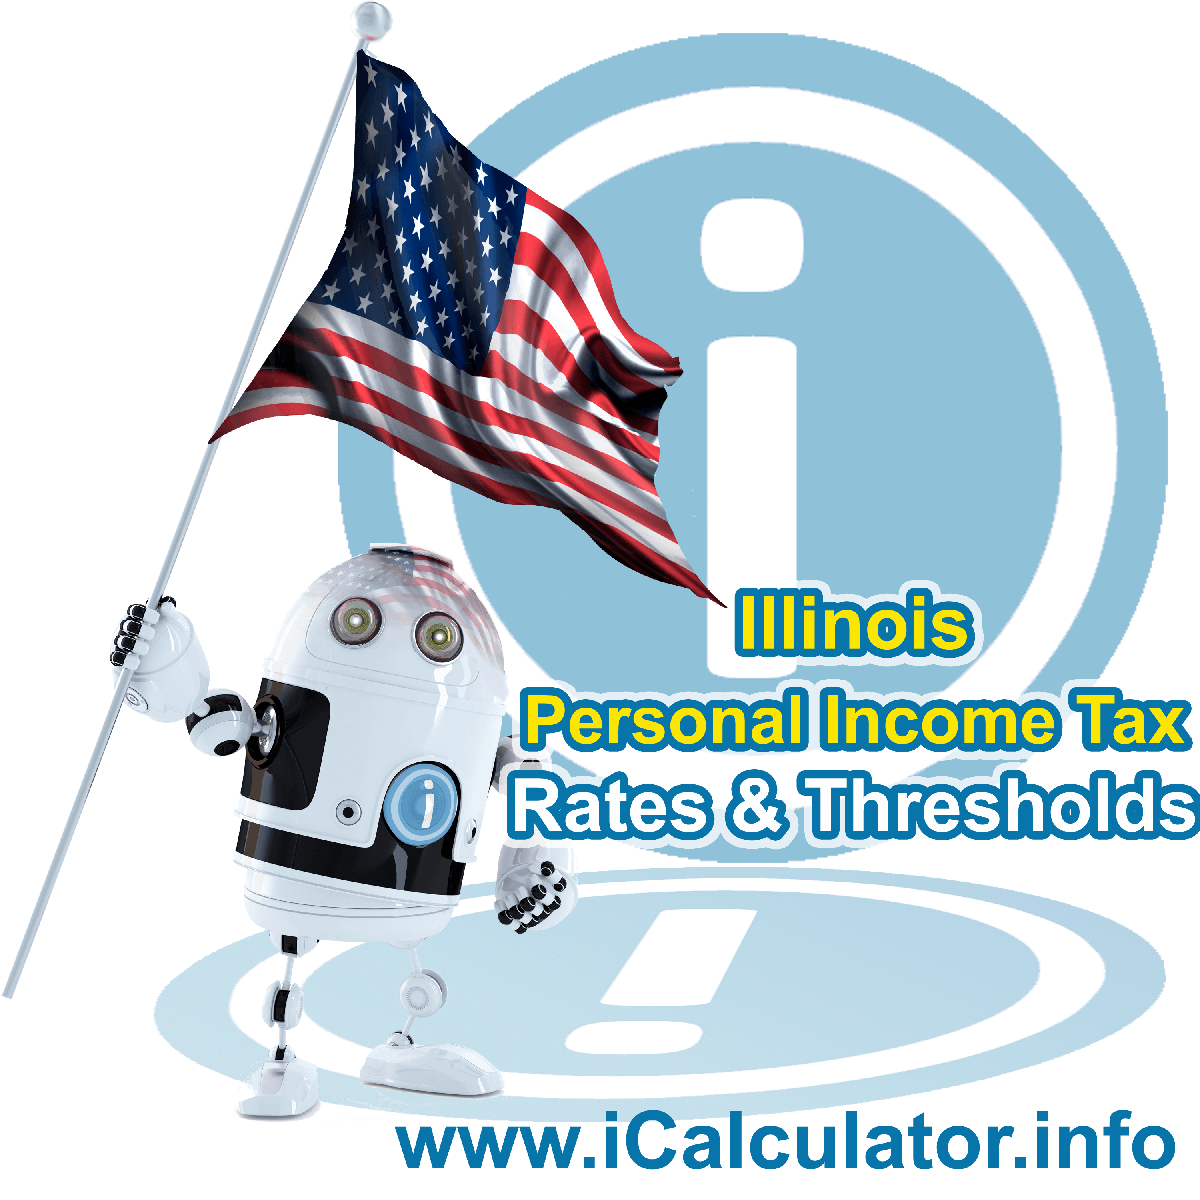 Illinois State Tax Tables 2015. This image displays details of the Illinois State Tax Tables for the 2015 tax return year which is provided in support of the 2015 US Tax Calculator